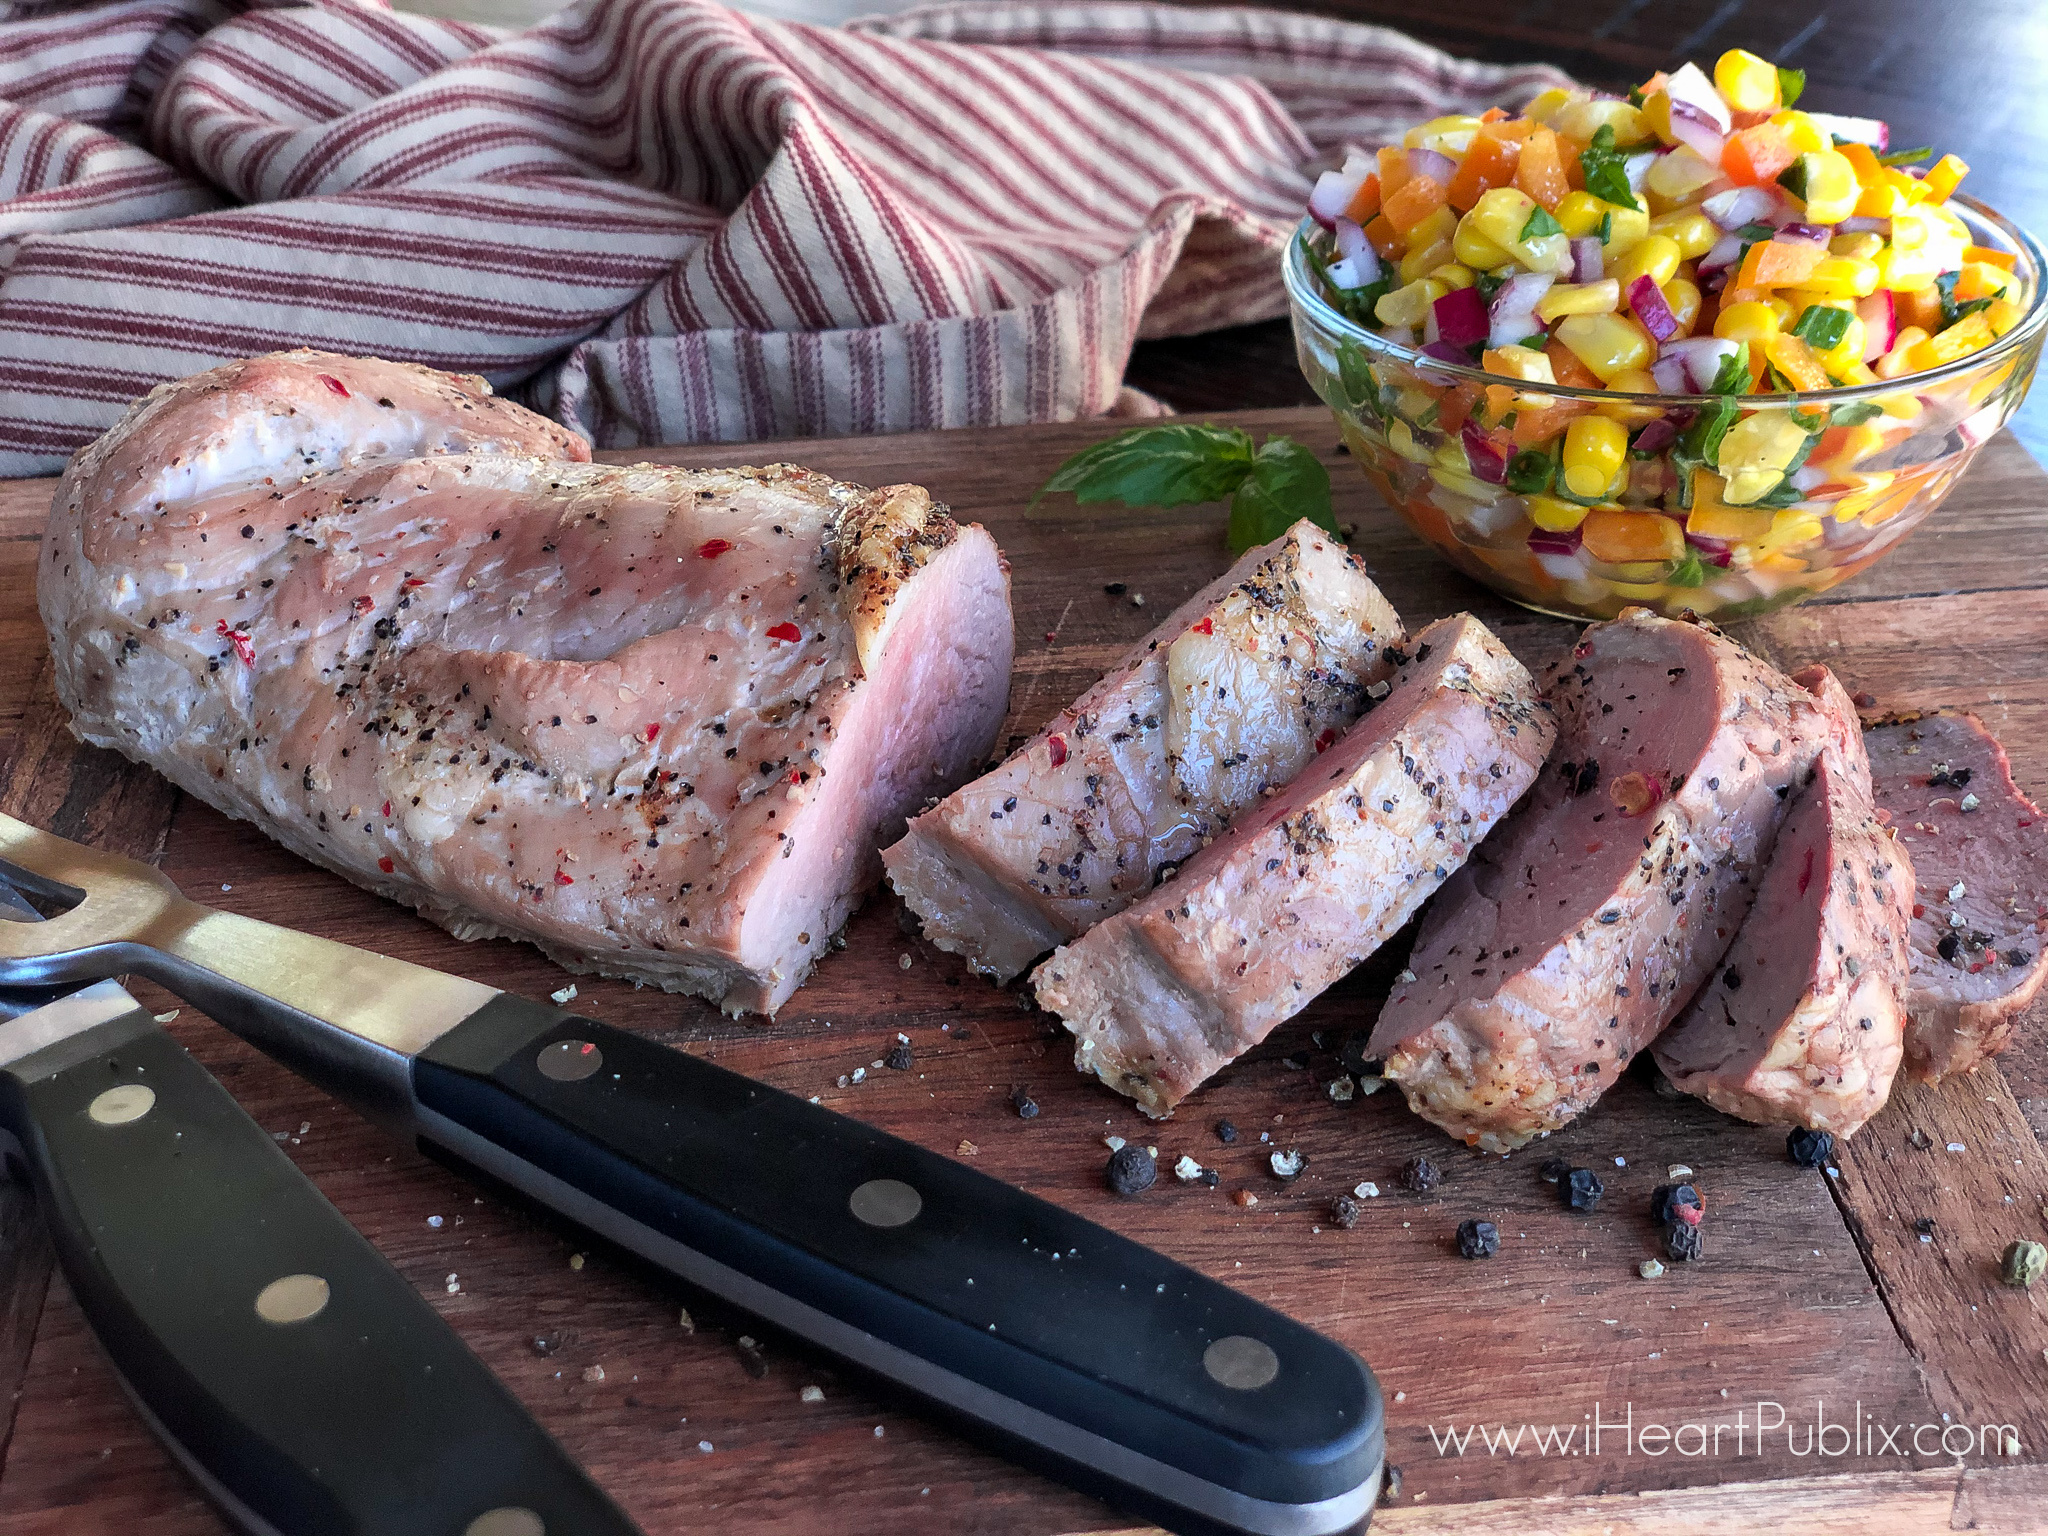 Smithfield Marinated Fresh Pork Is BOGO At Publix With A Digital Coupon For Even MORE Savings! on I Heart Publix